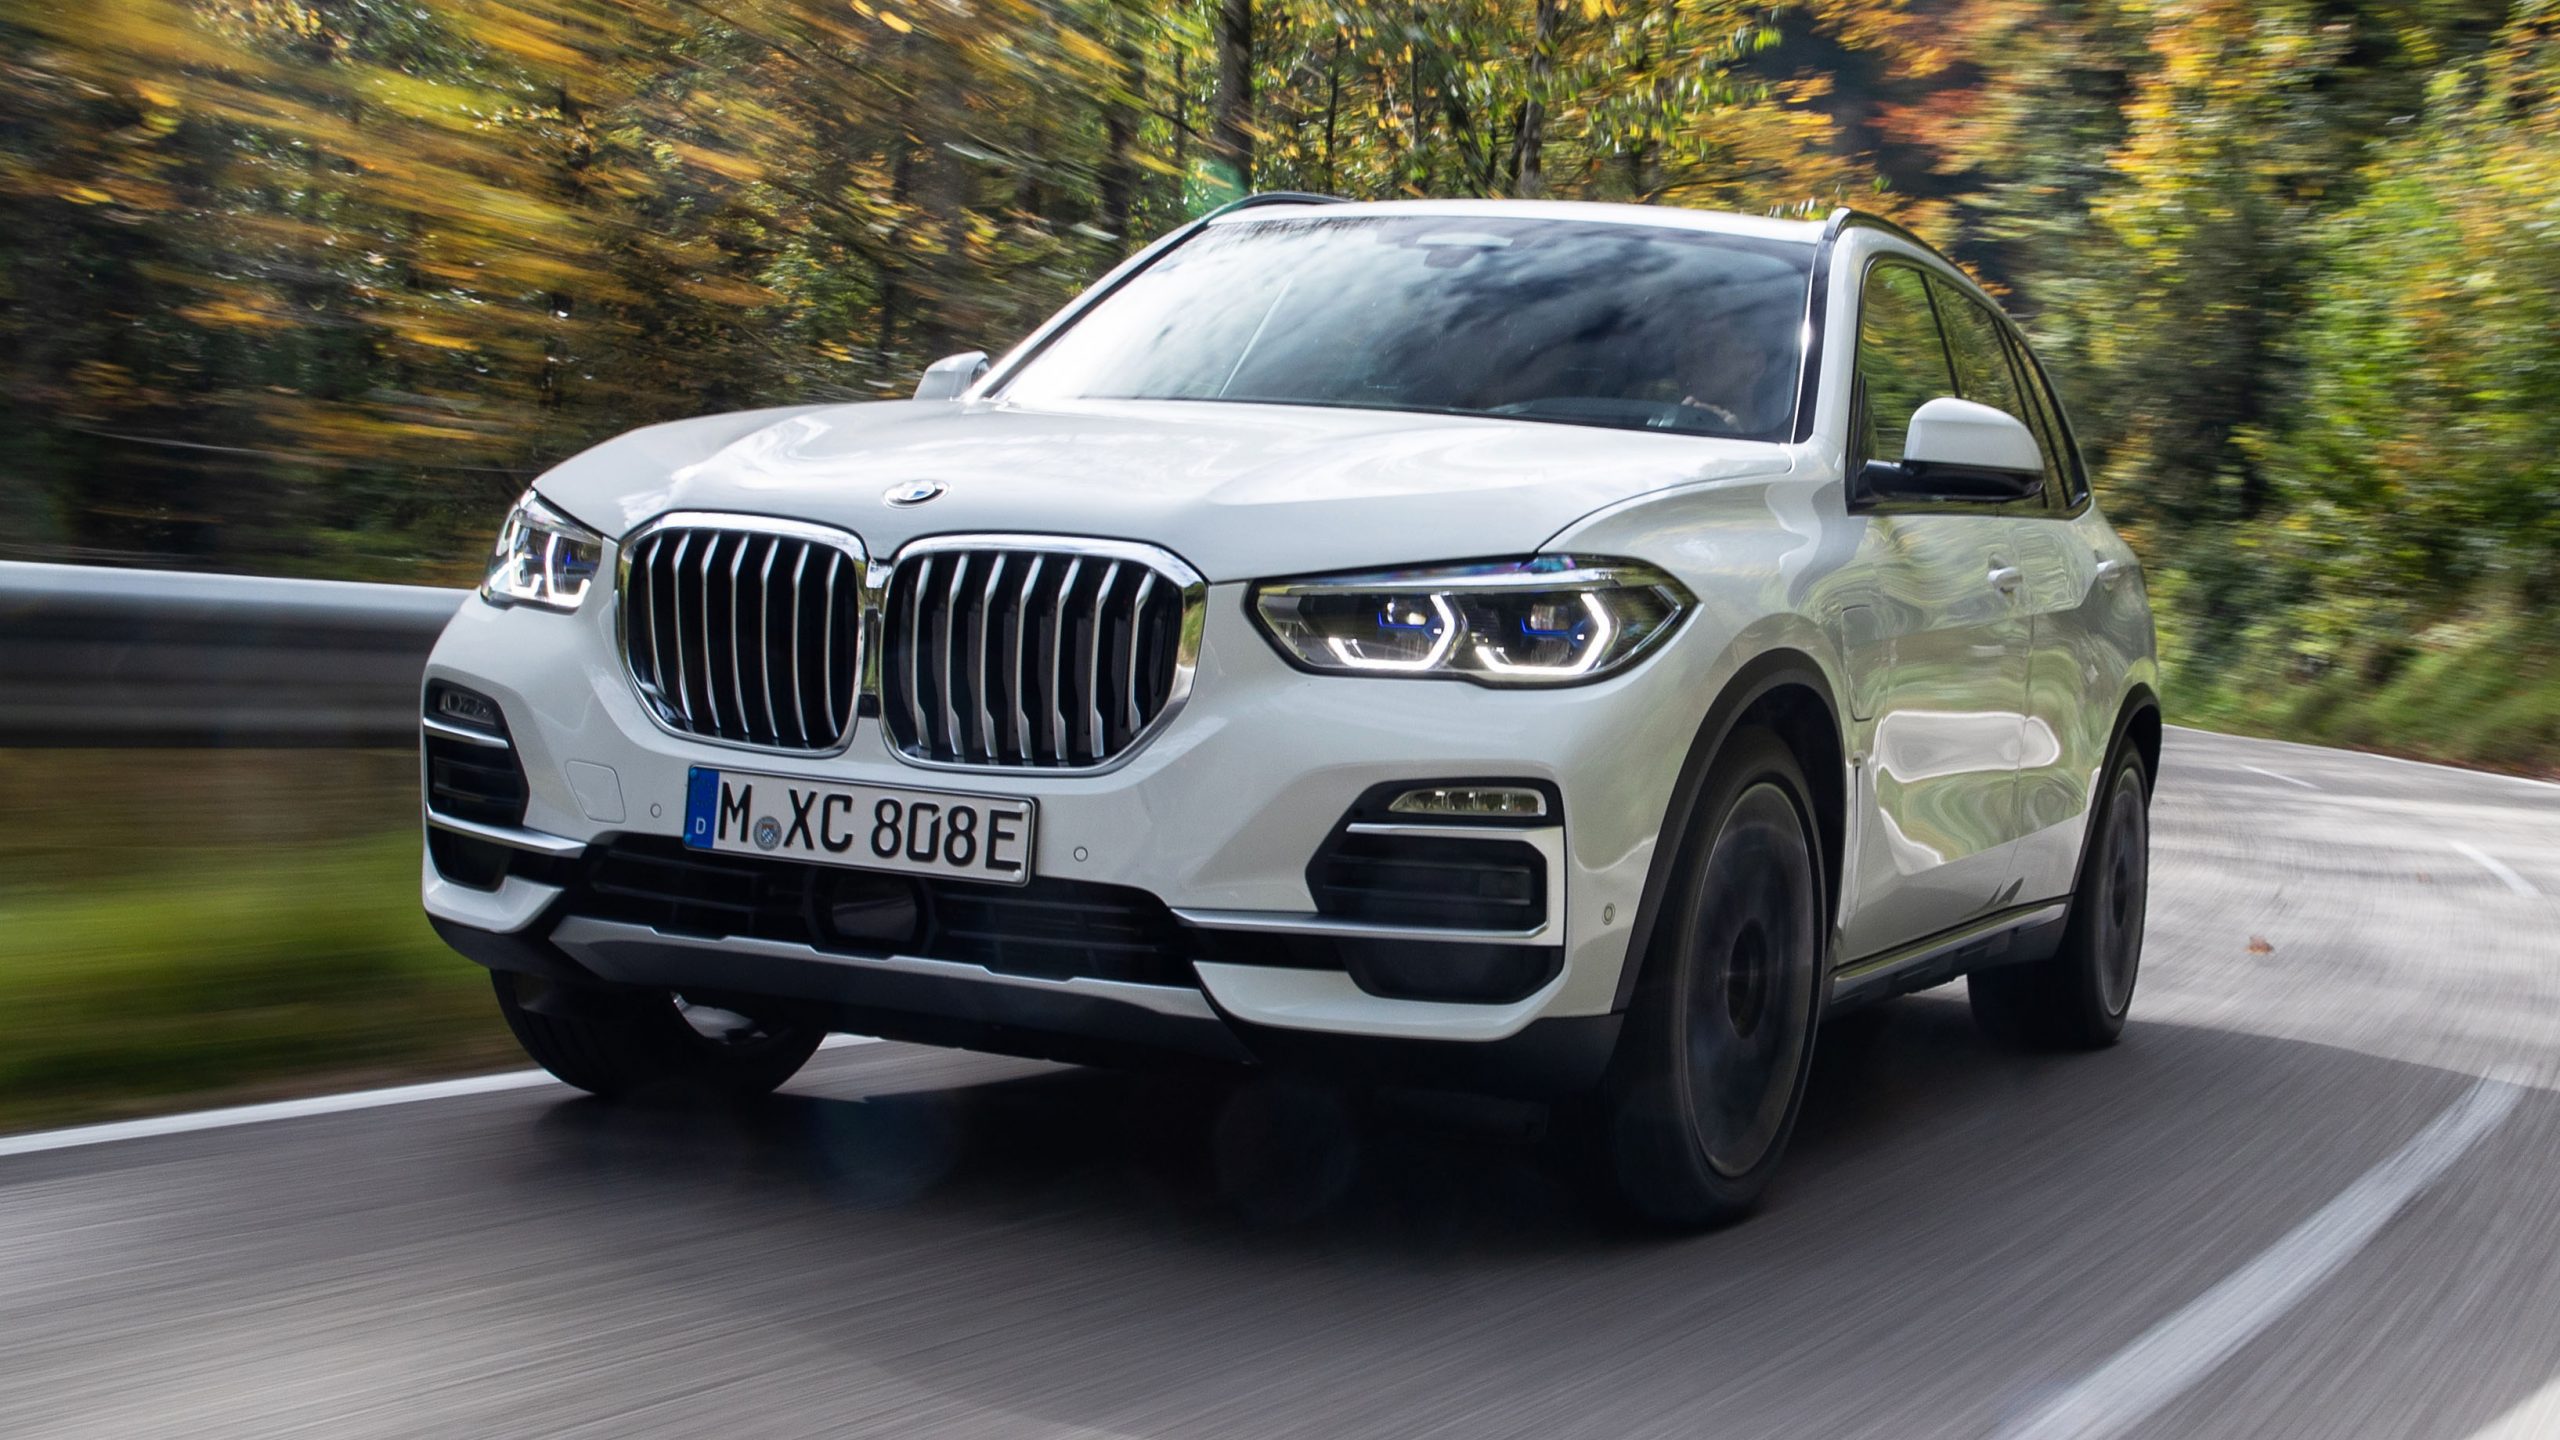 Bmw X5 Xdrive 45e Hybrid Suv Tested Top Gear pertaining to measurements 3269 X 1839